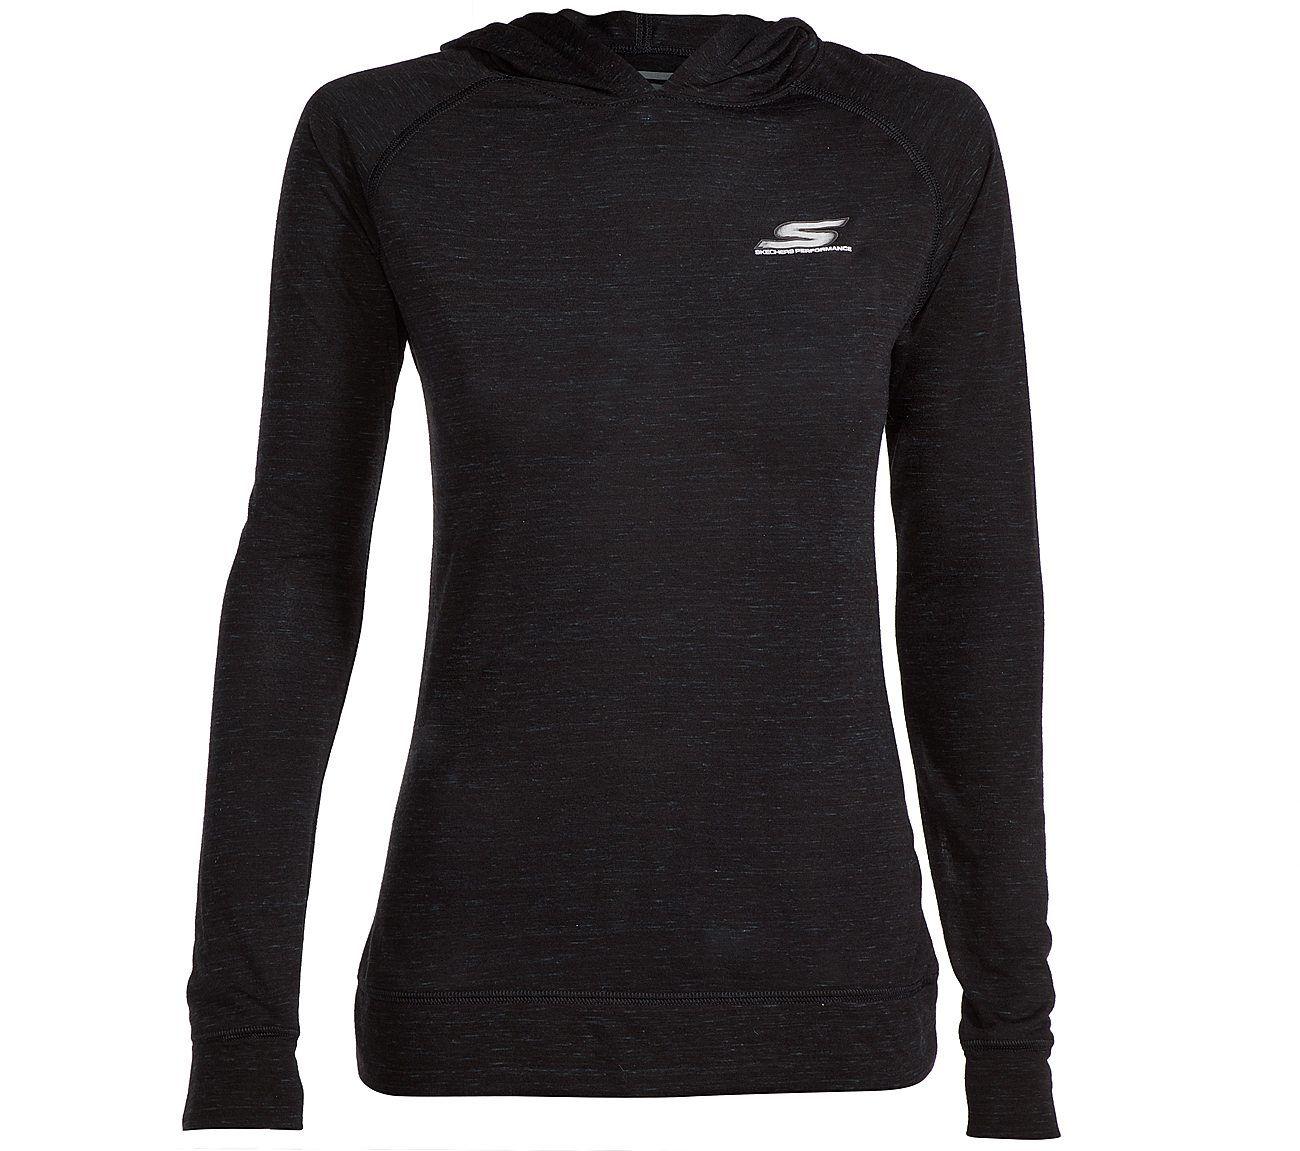 Only Clothing and Apparel Logo - Buy SKECHERS Logo Burnout Hoodie Apparel Shoes only $20.00